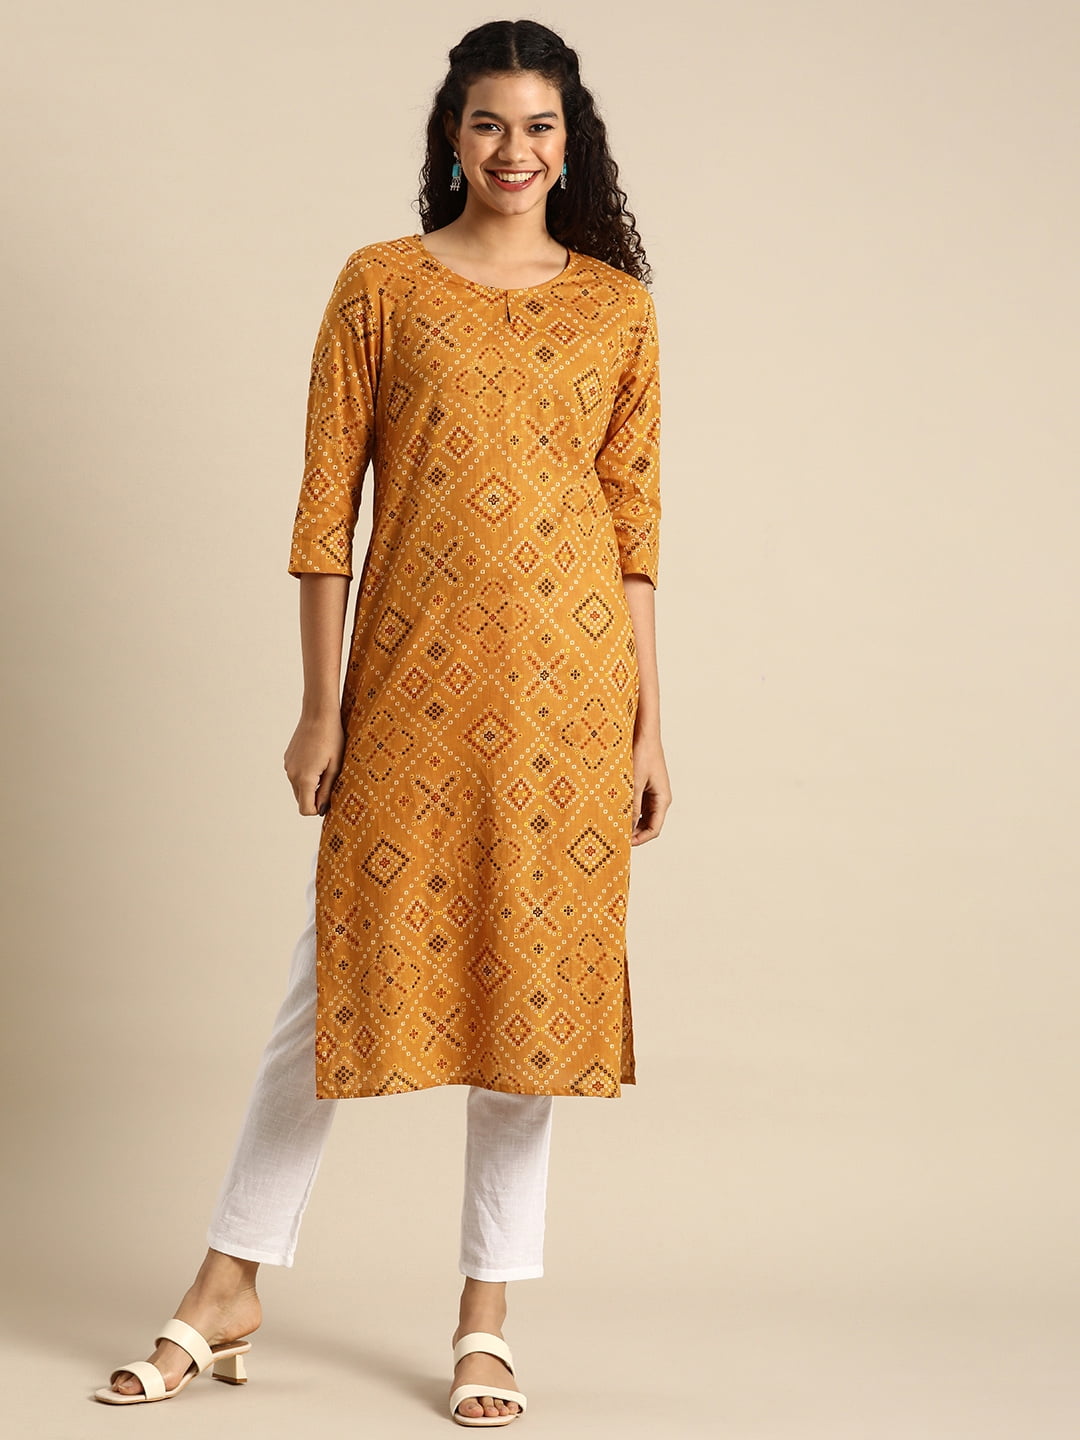 Buy Rayon Yellow Embroidered Designer Kurti Online : 254945 - New Arrivals